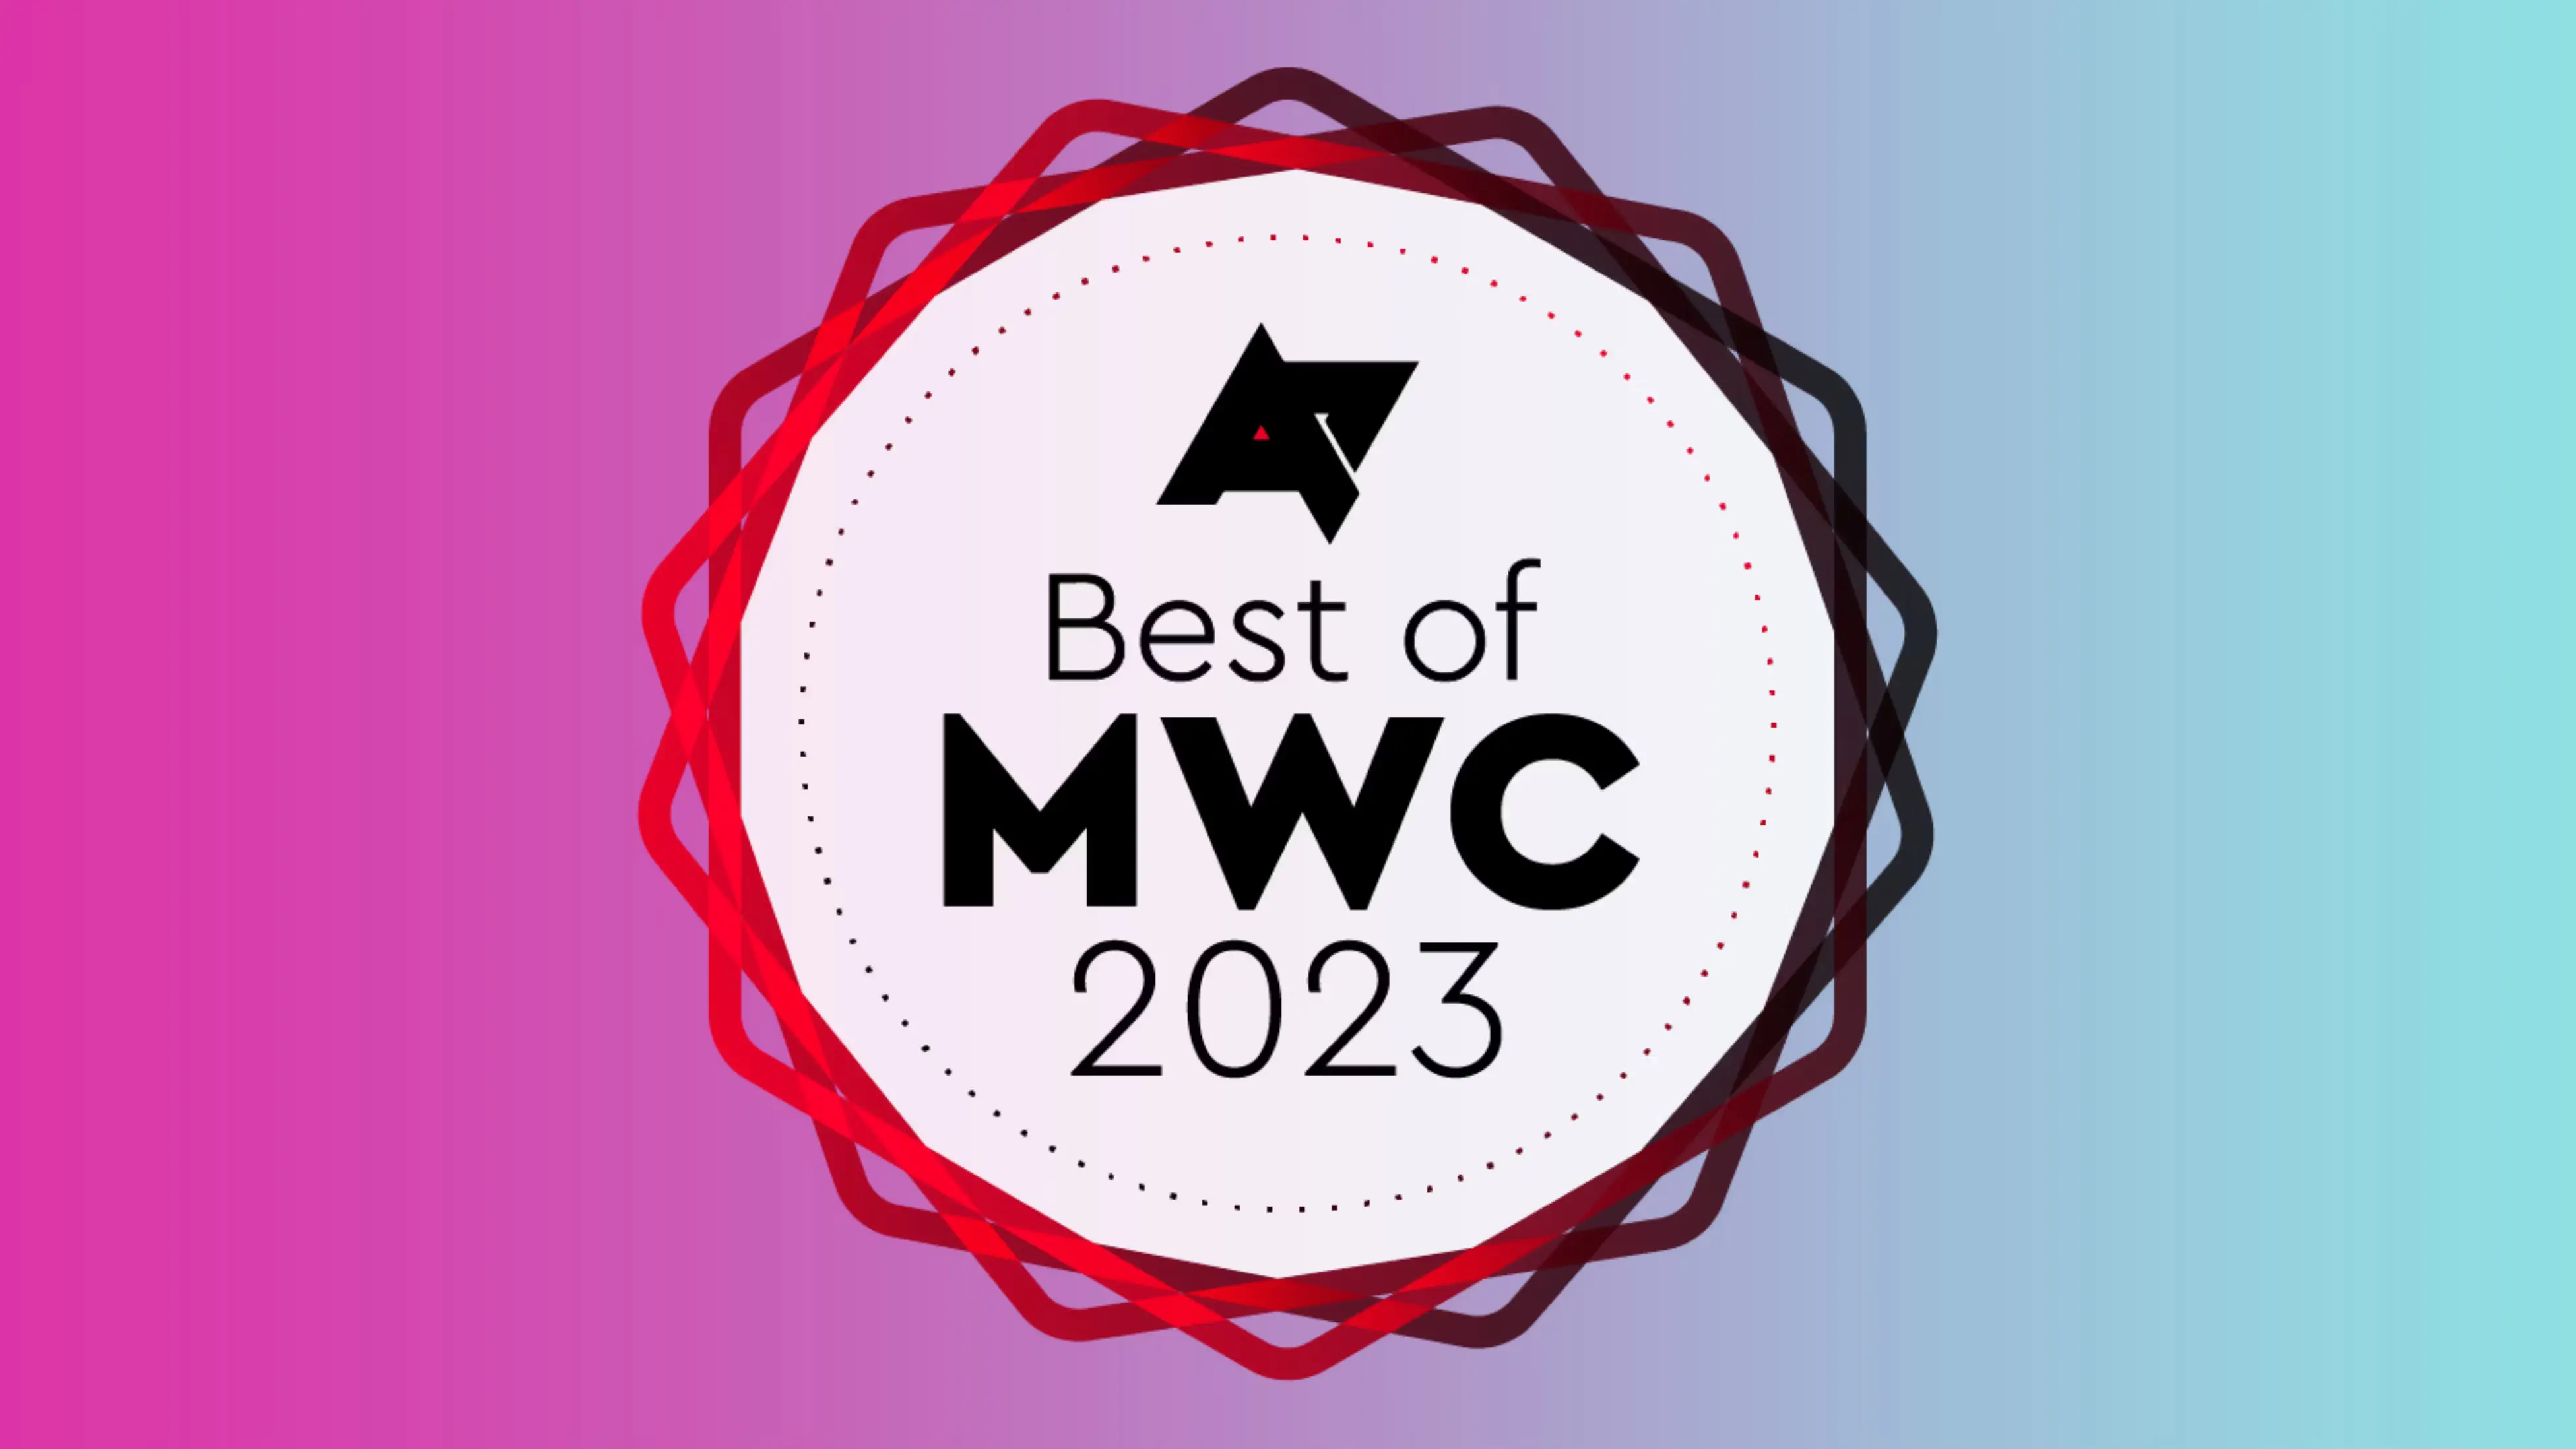 What was presented at MWC 2023?